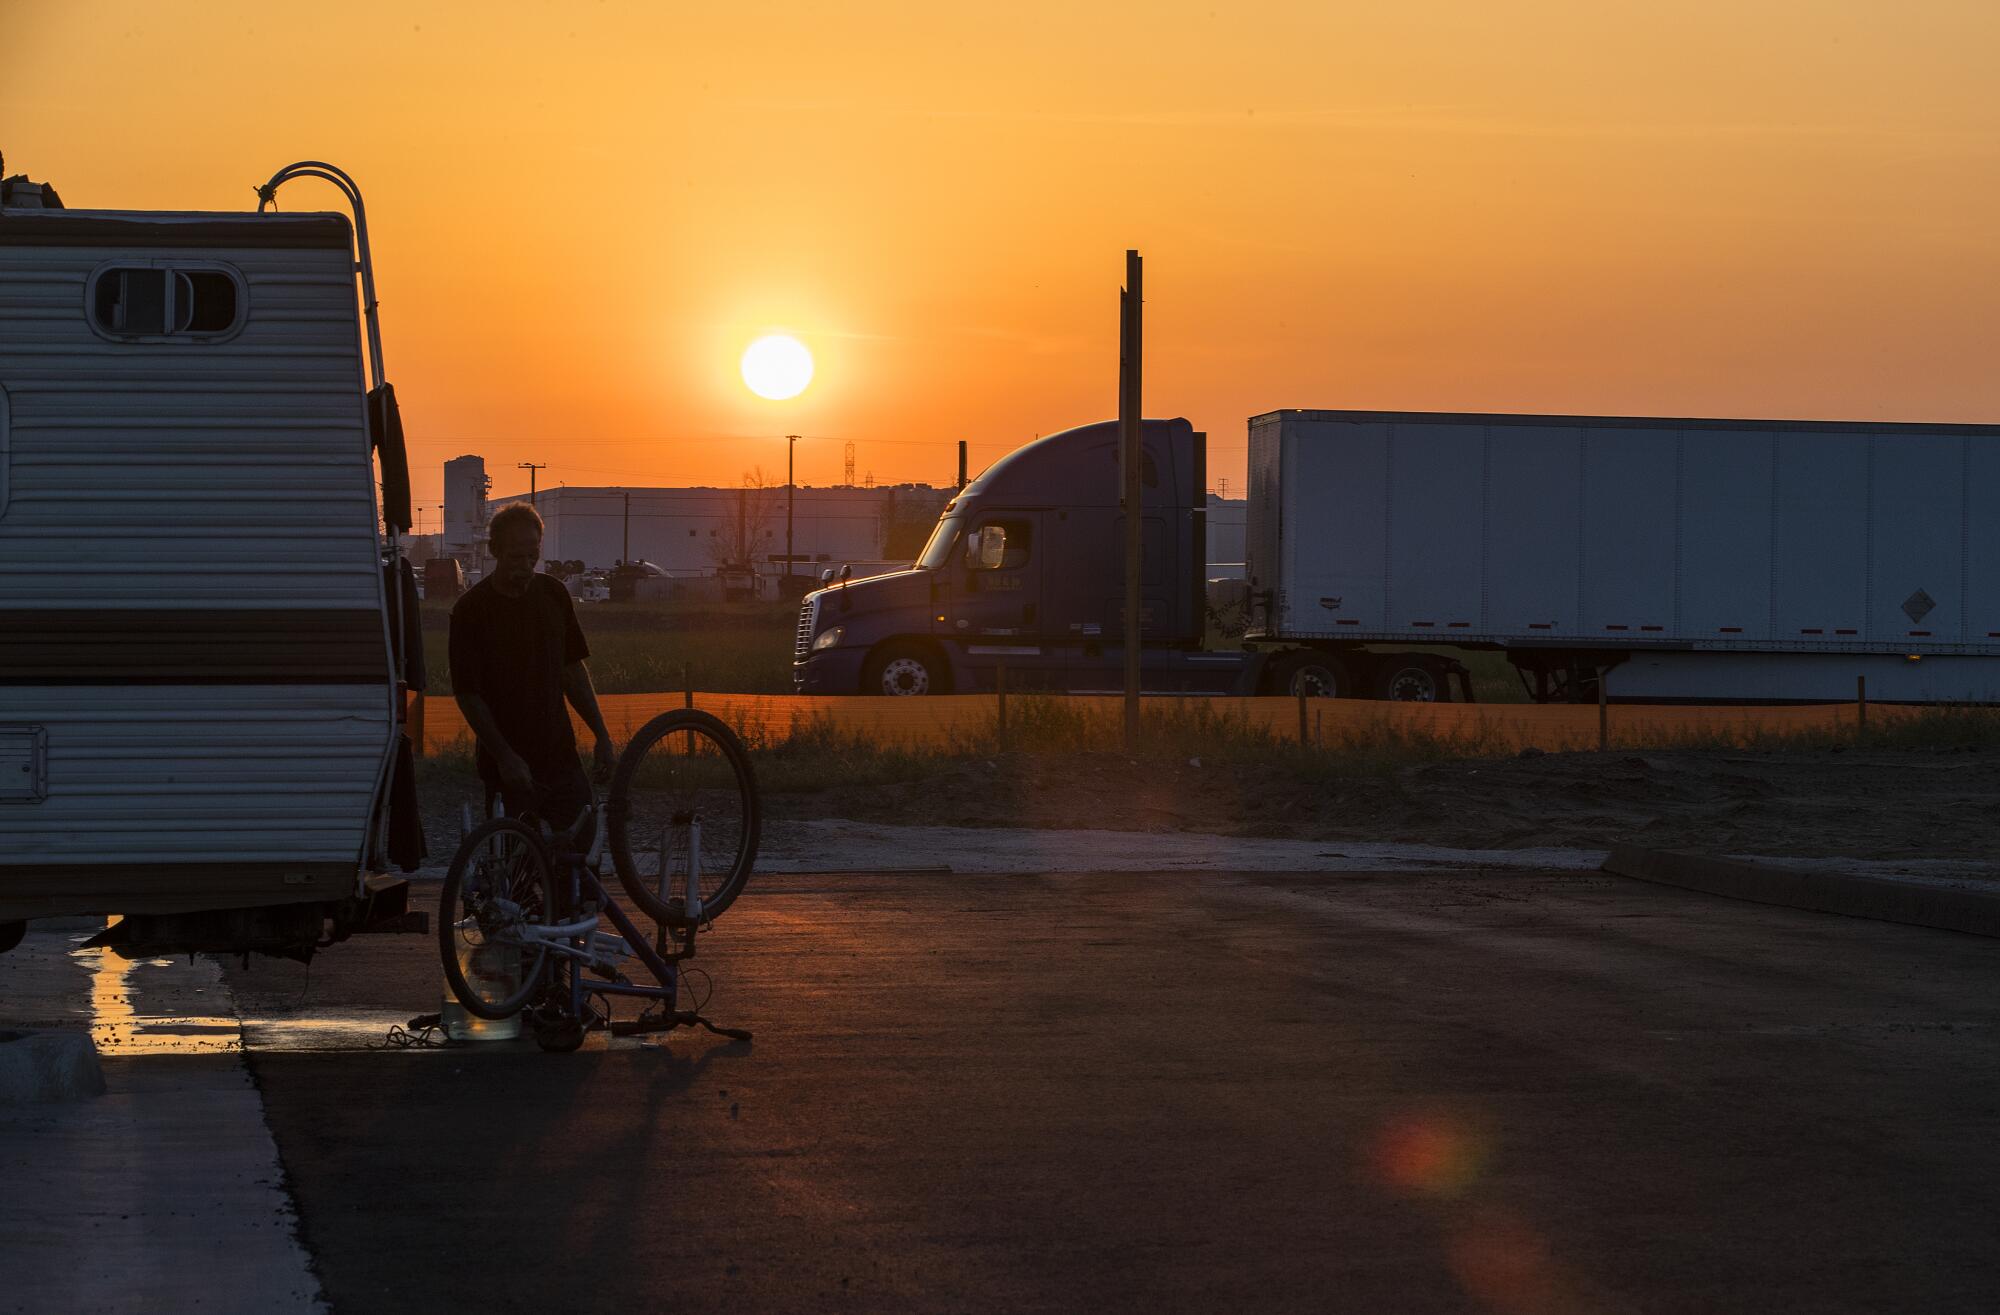 The sun sets behind Fontana traffic. Trucks proliferate to service the many warehouses.